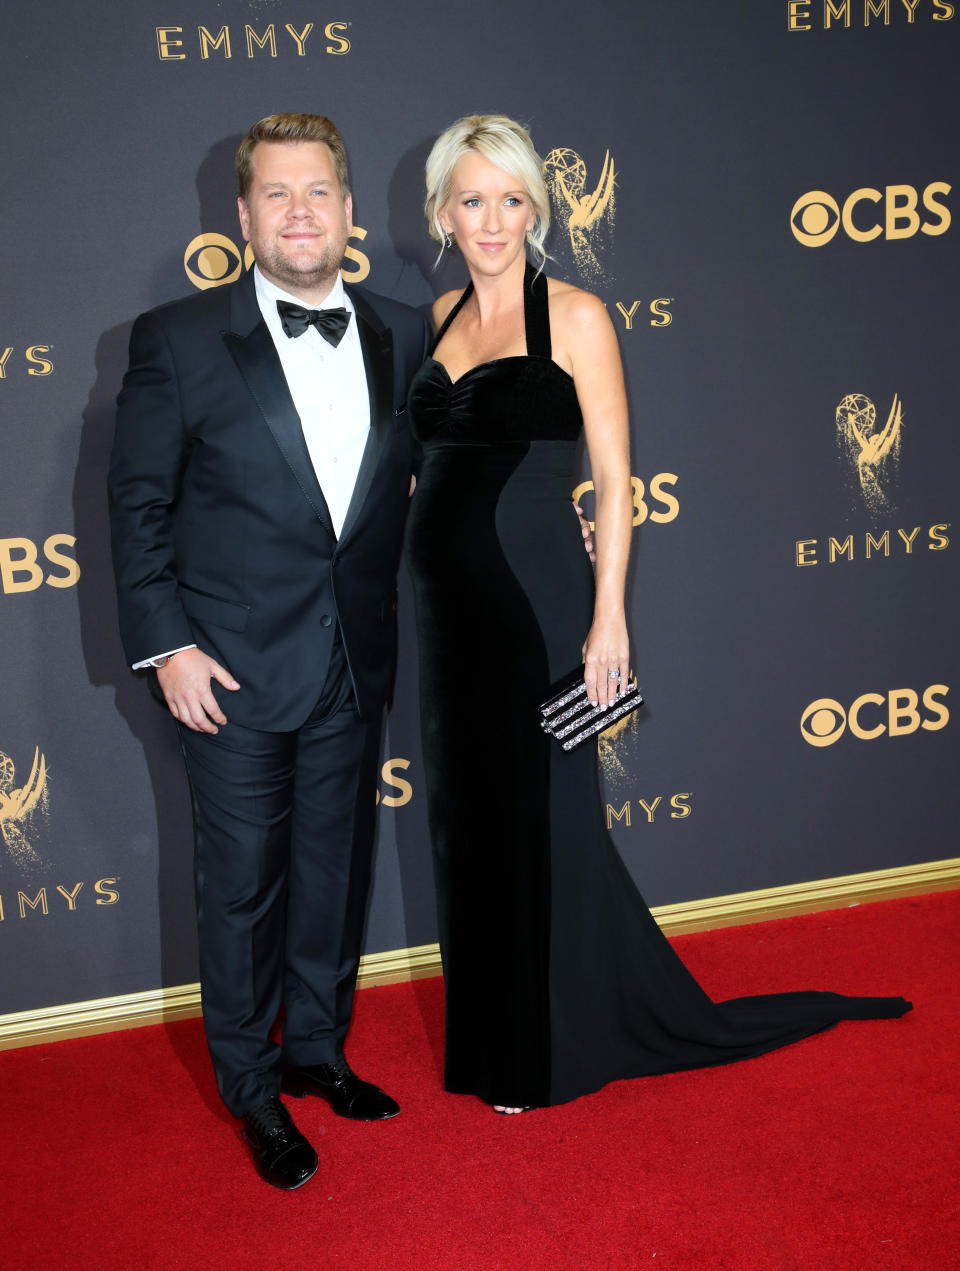 LOS ANGELES, CA - SEPTEMBER 17: TV personality James Corden (L) and producer Julia Carey attend the 69th Annual Primetime Emmy Awards - Arrivals at Microsoft Theater on September 17, 2017 in Los Angeles, California. (Photo by David Livingston/Getty Images)